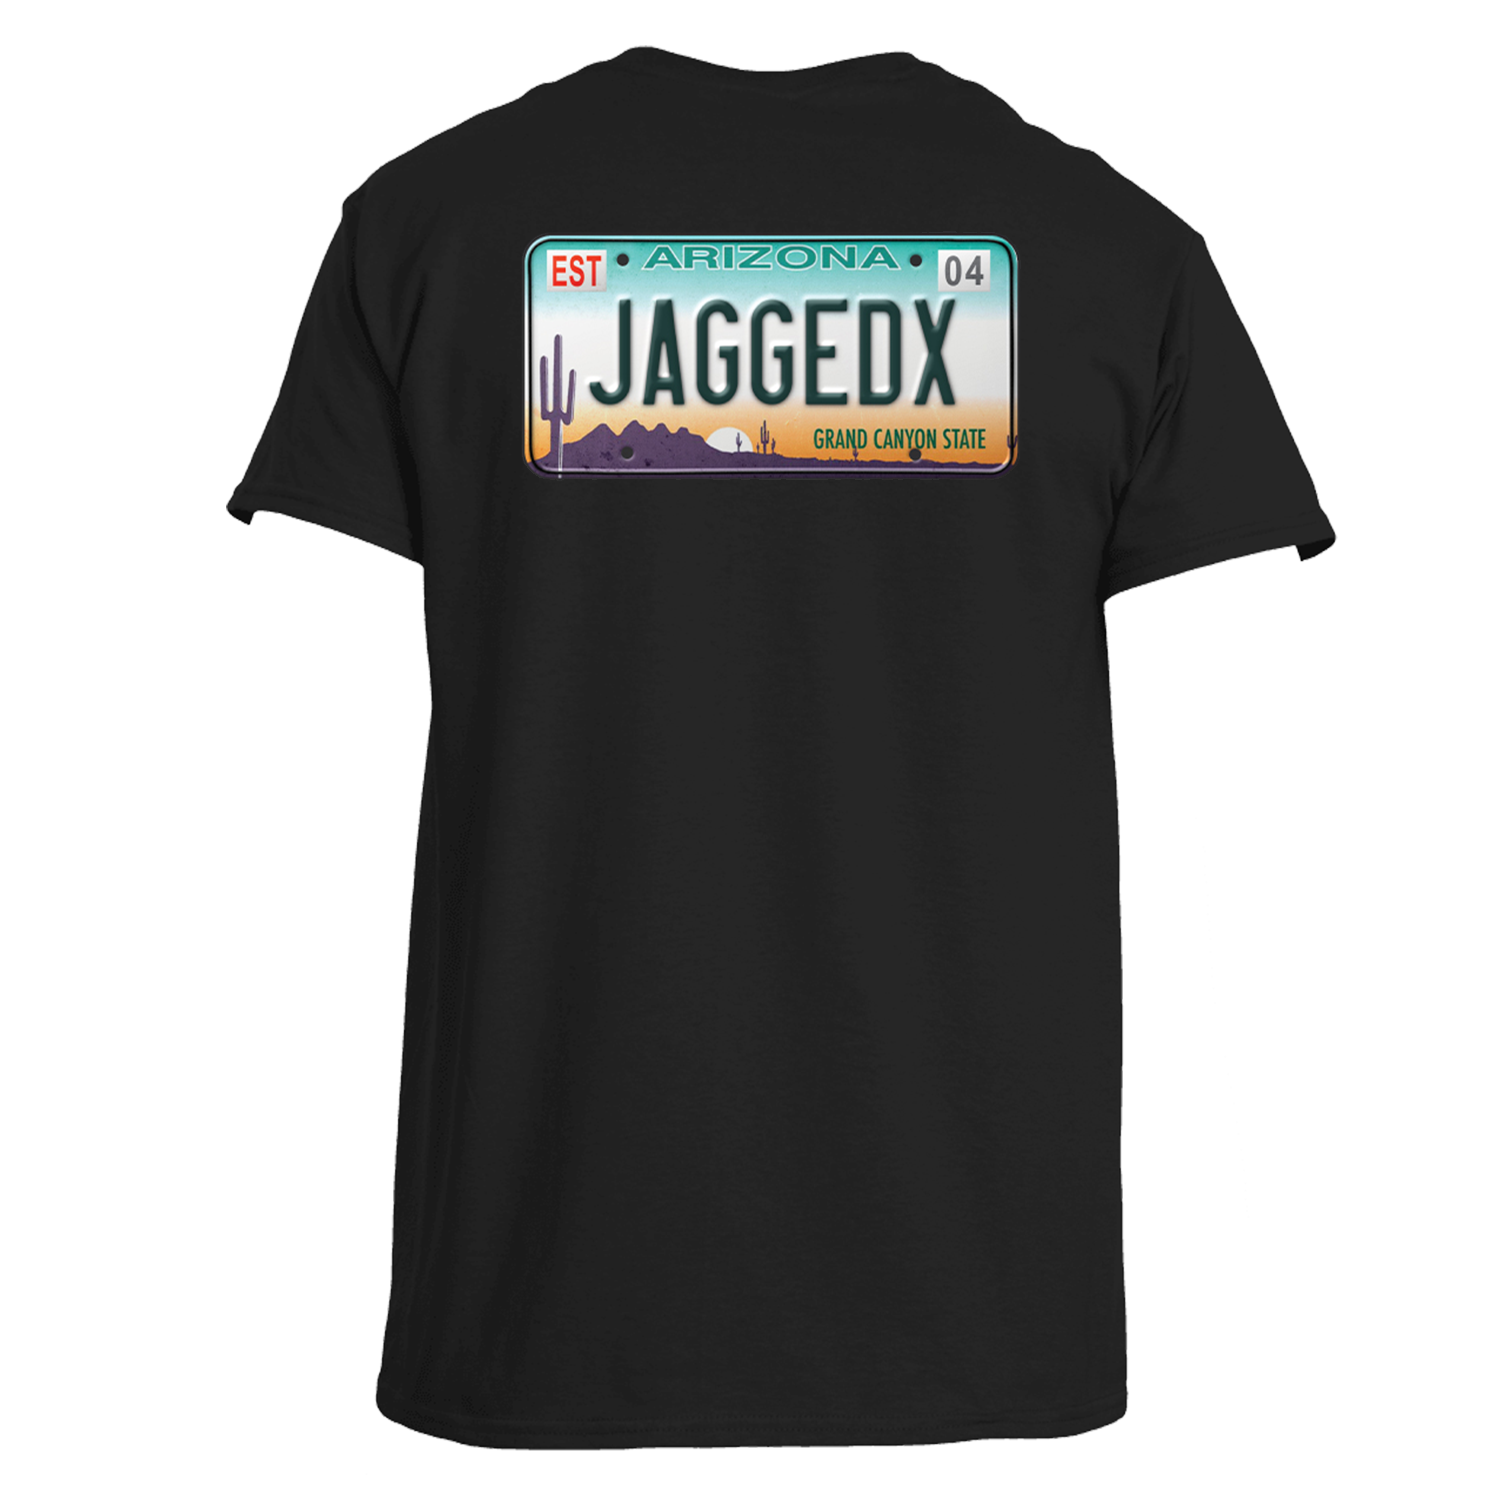 jagged x offroad license plate shirt back